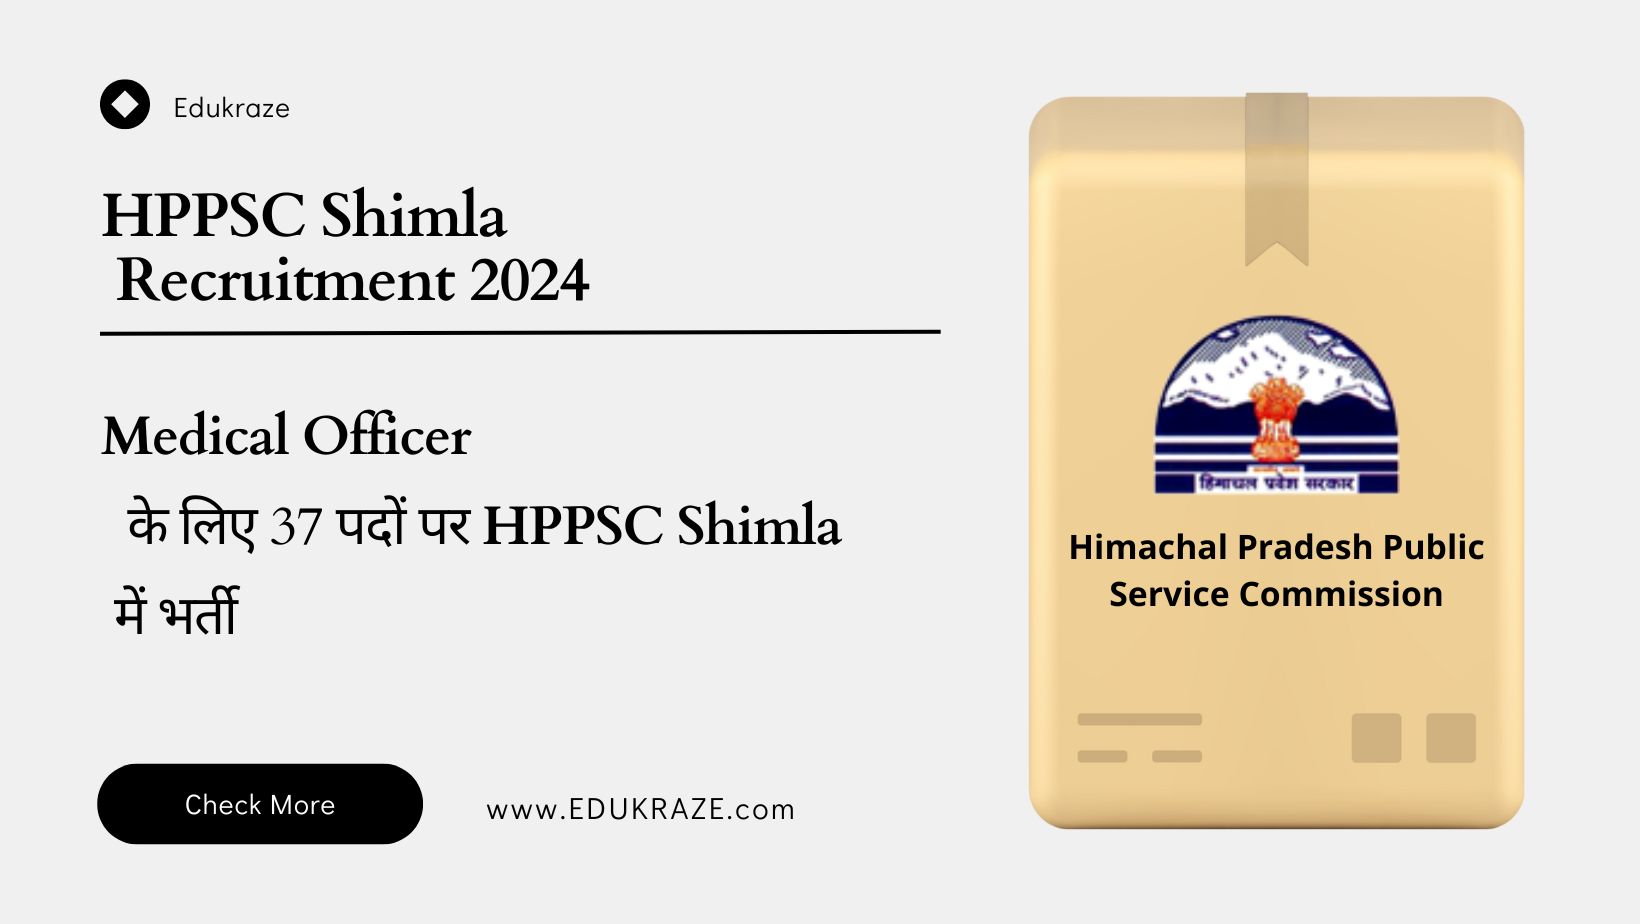 HPPSC Shimla Homoeopathic Medical Officer Recruitment 2024 Notification Out For 22 Posts